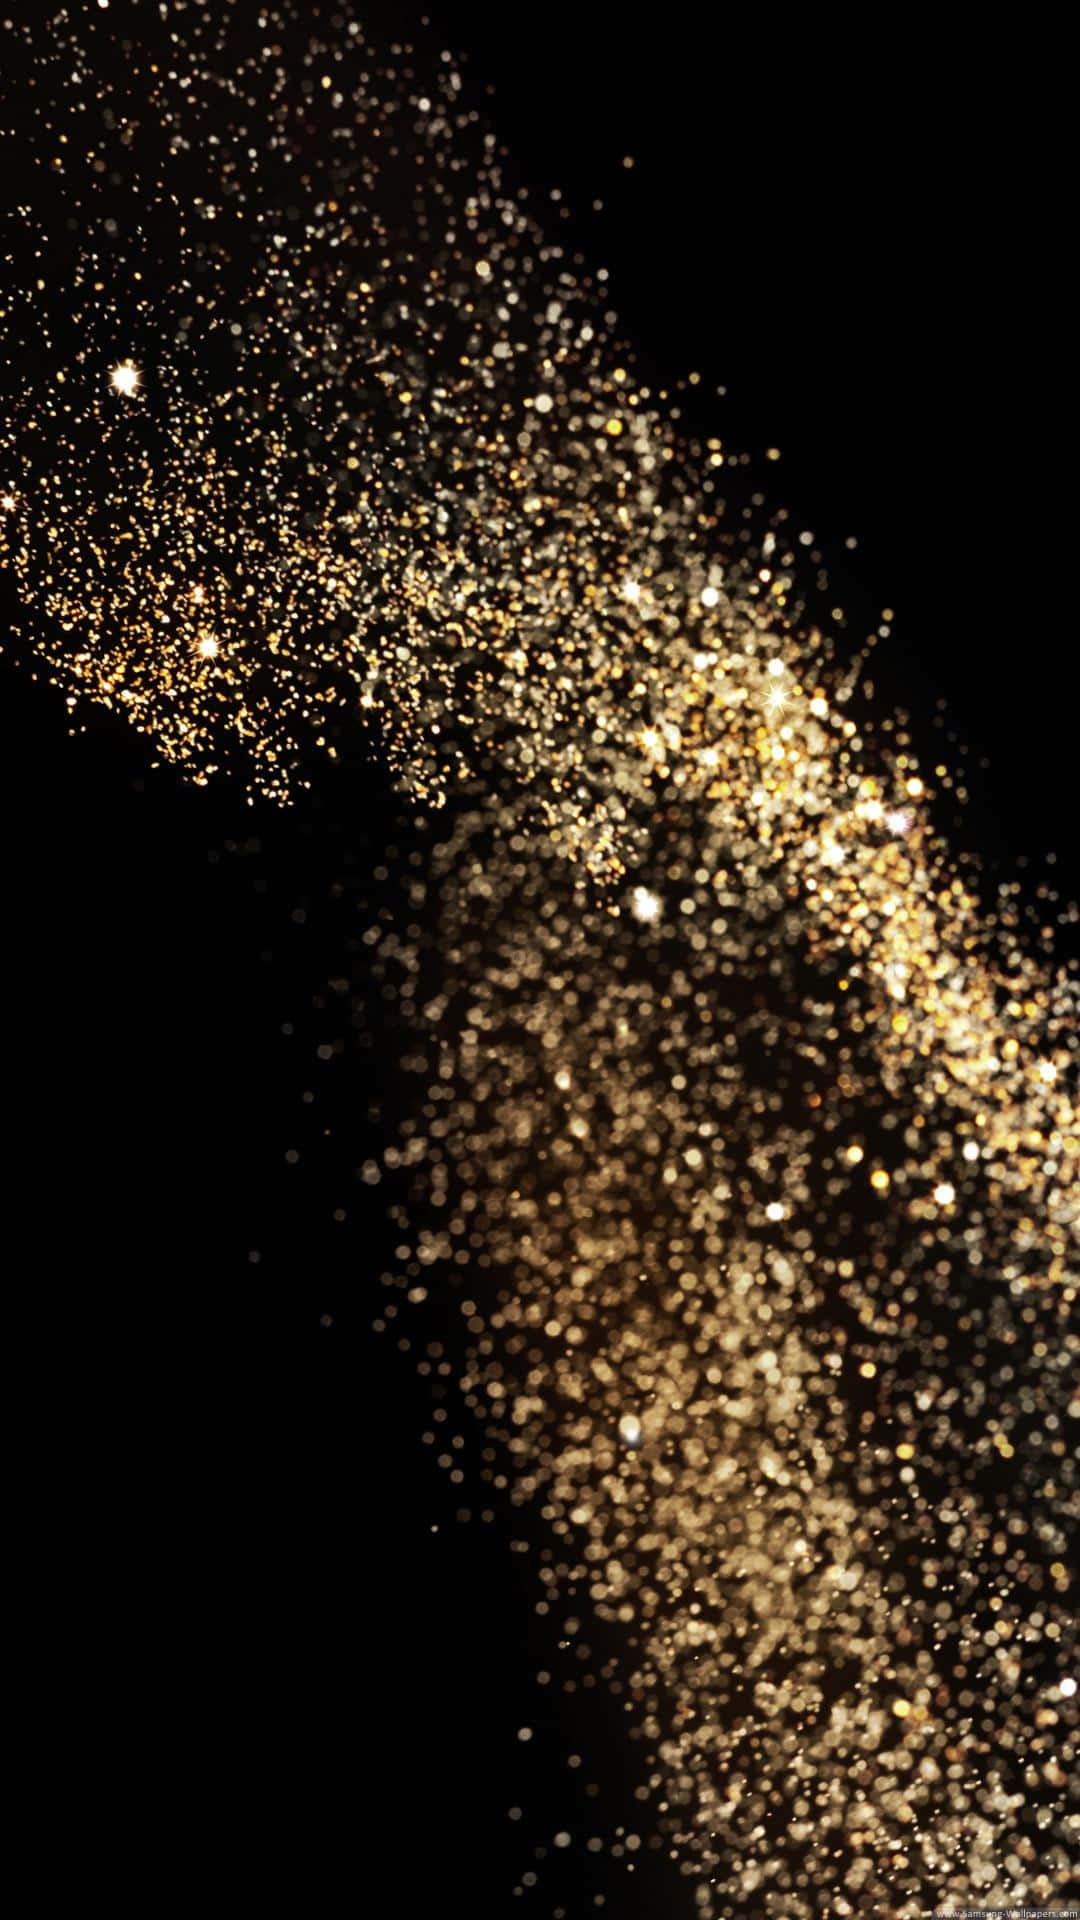 A Gold Dust Falling On A Black Background Wallpaper